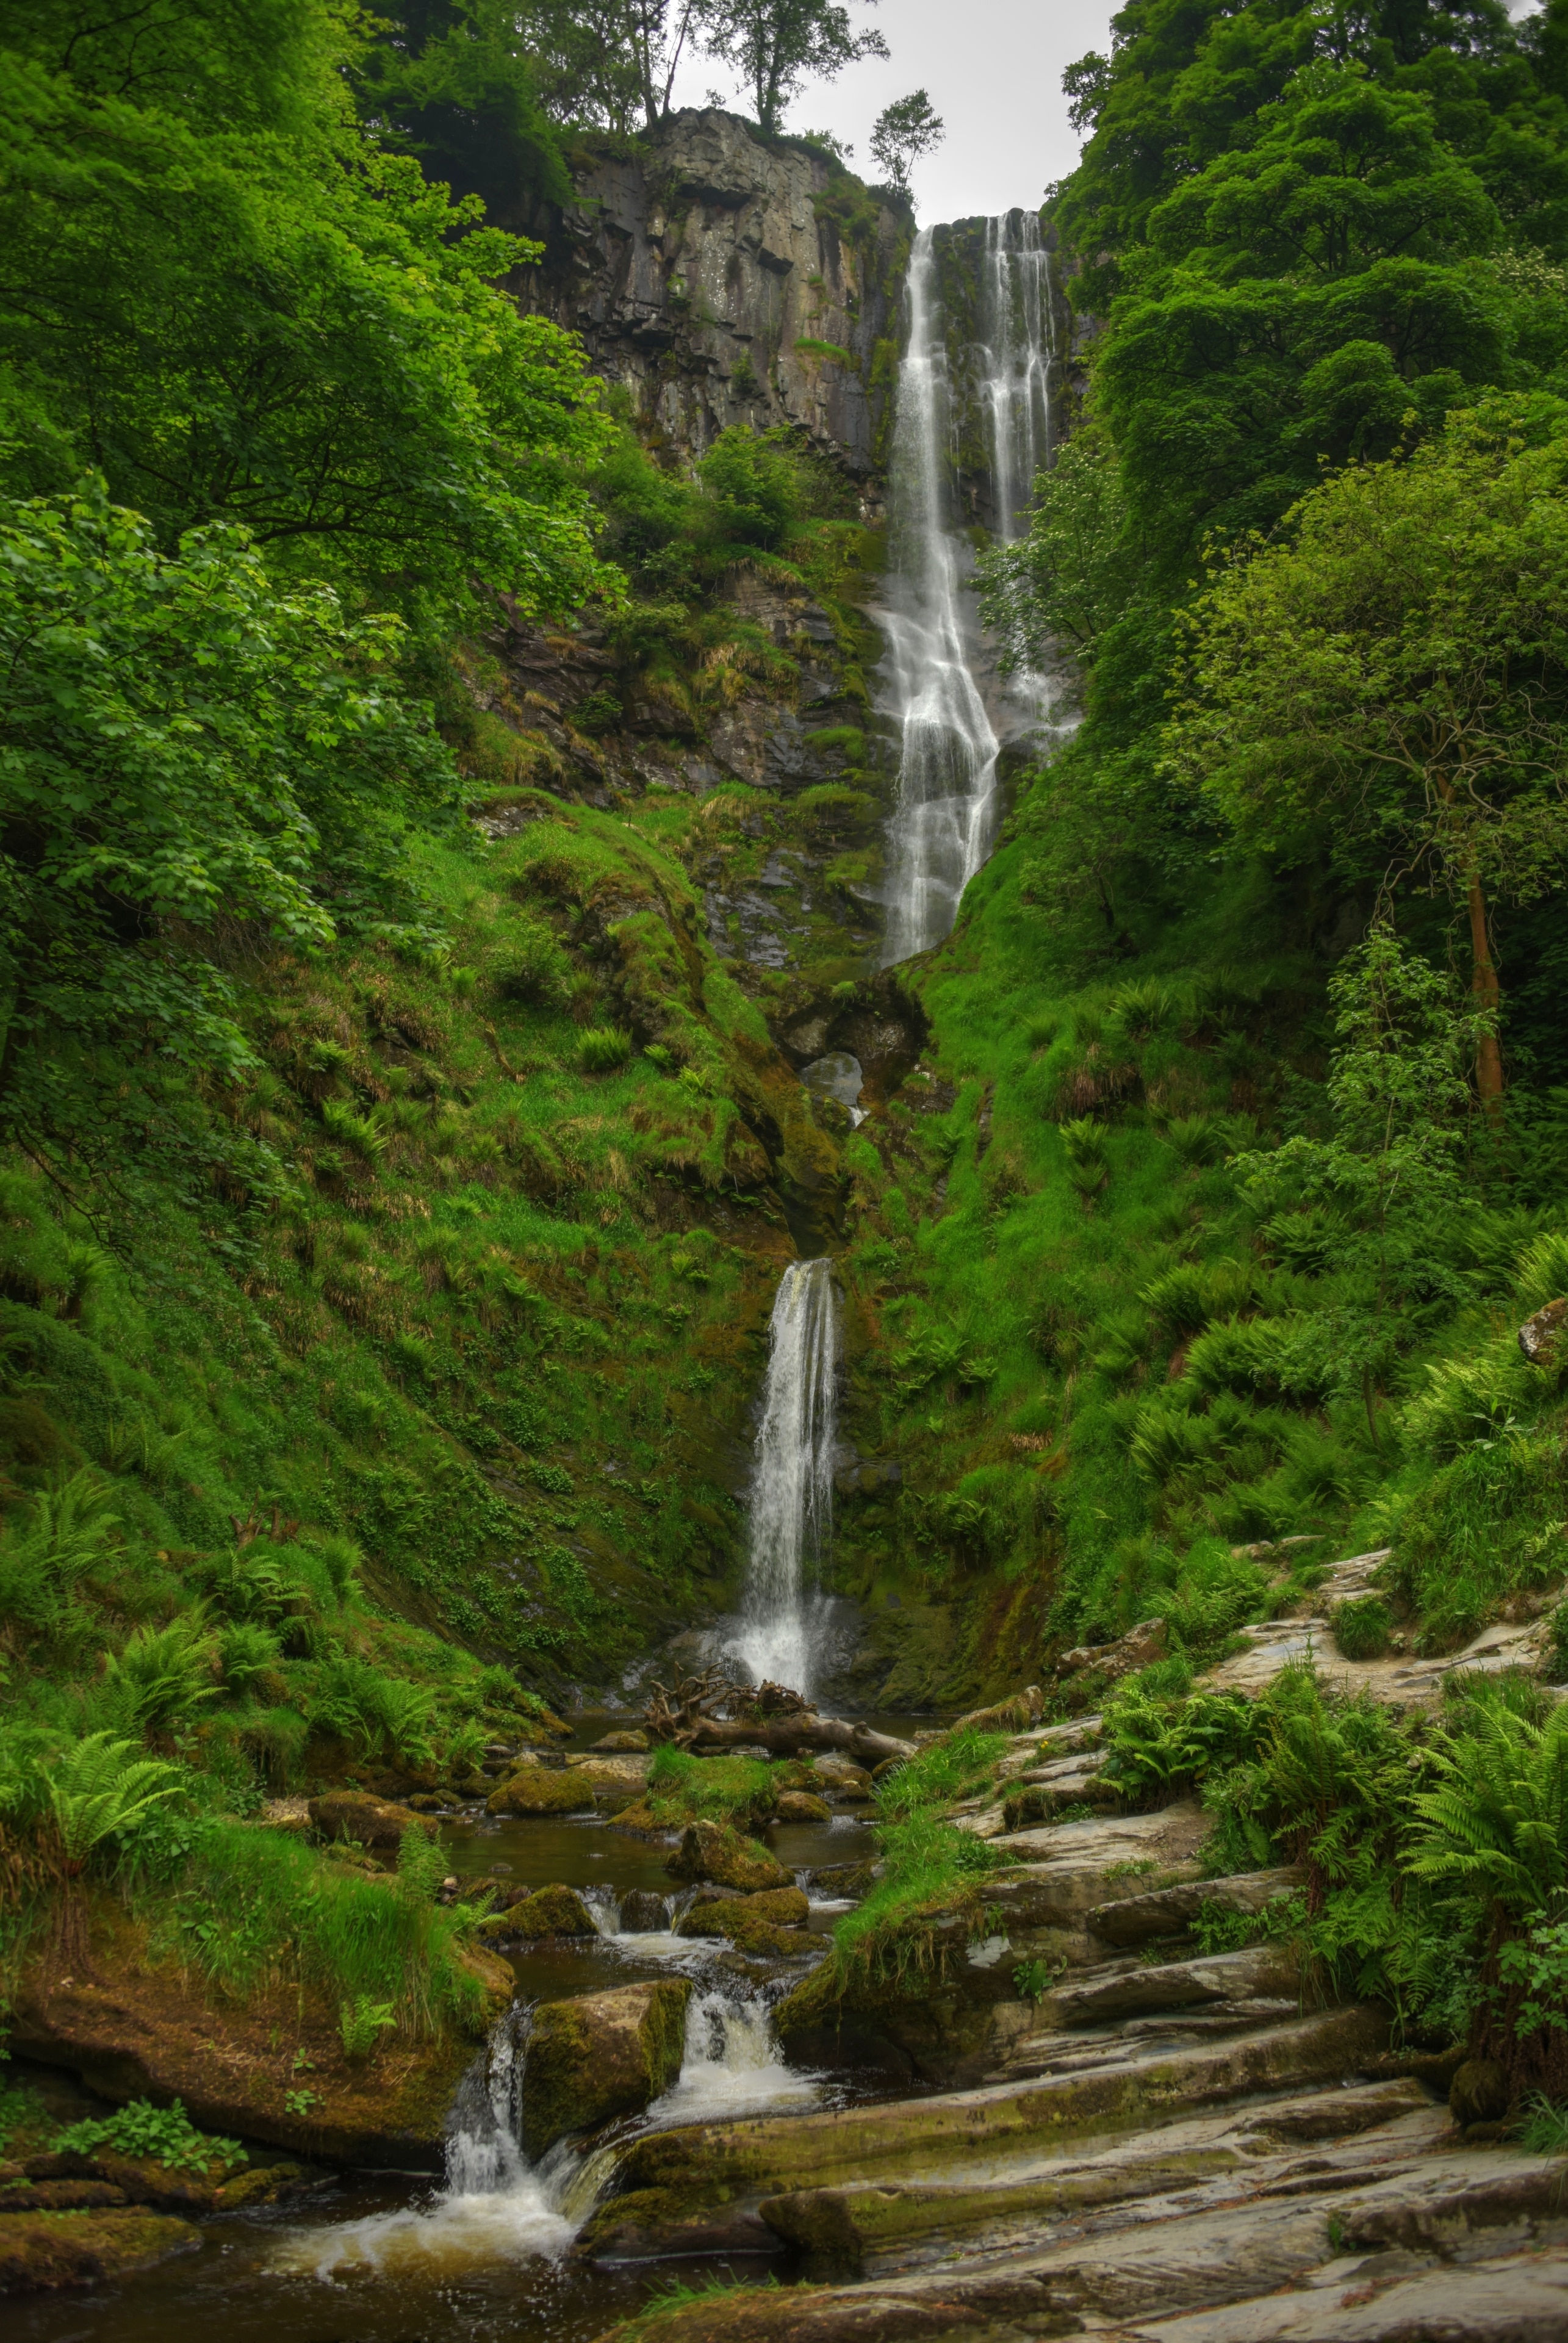 Pistyll Rhaeadr, a 240-foot waterfall that is one of the "Seven Wonders of Wales"